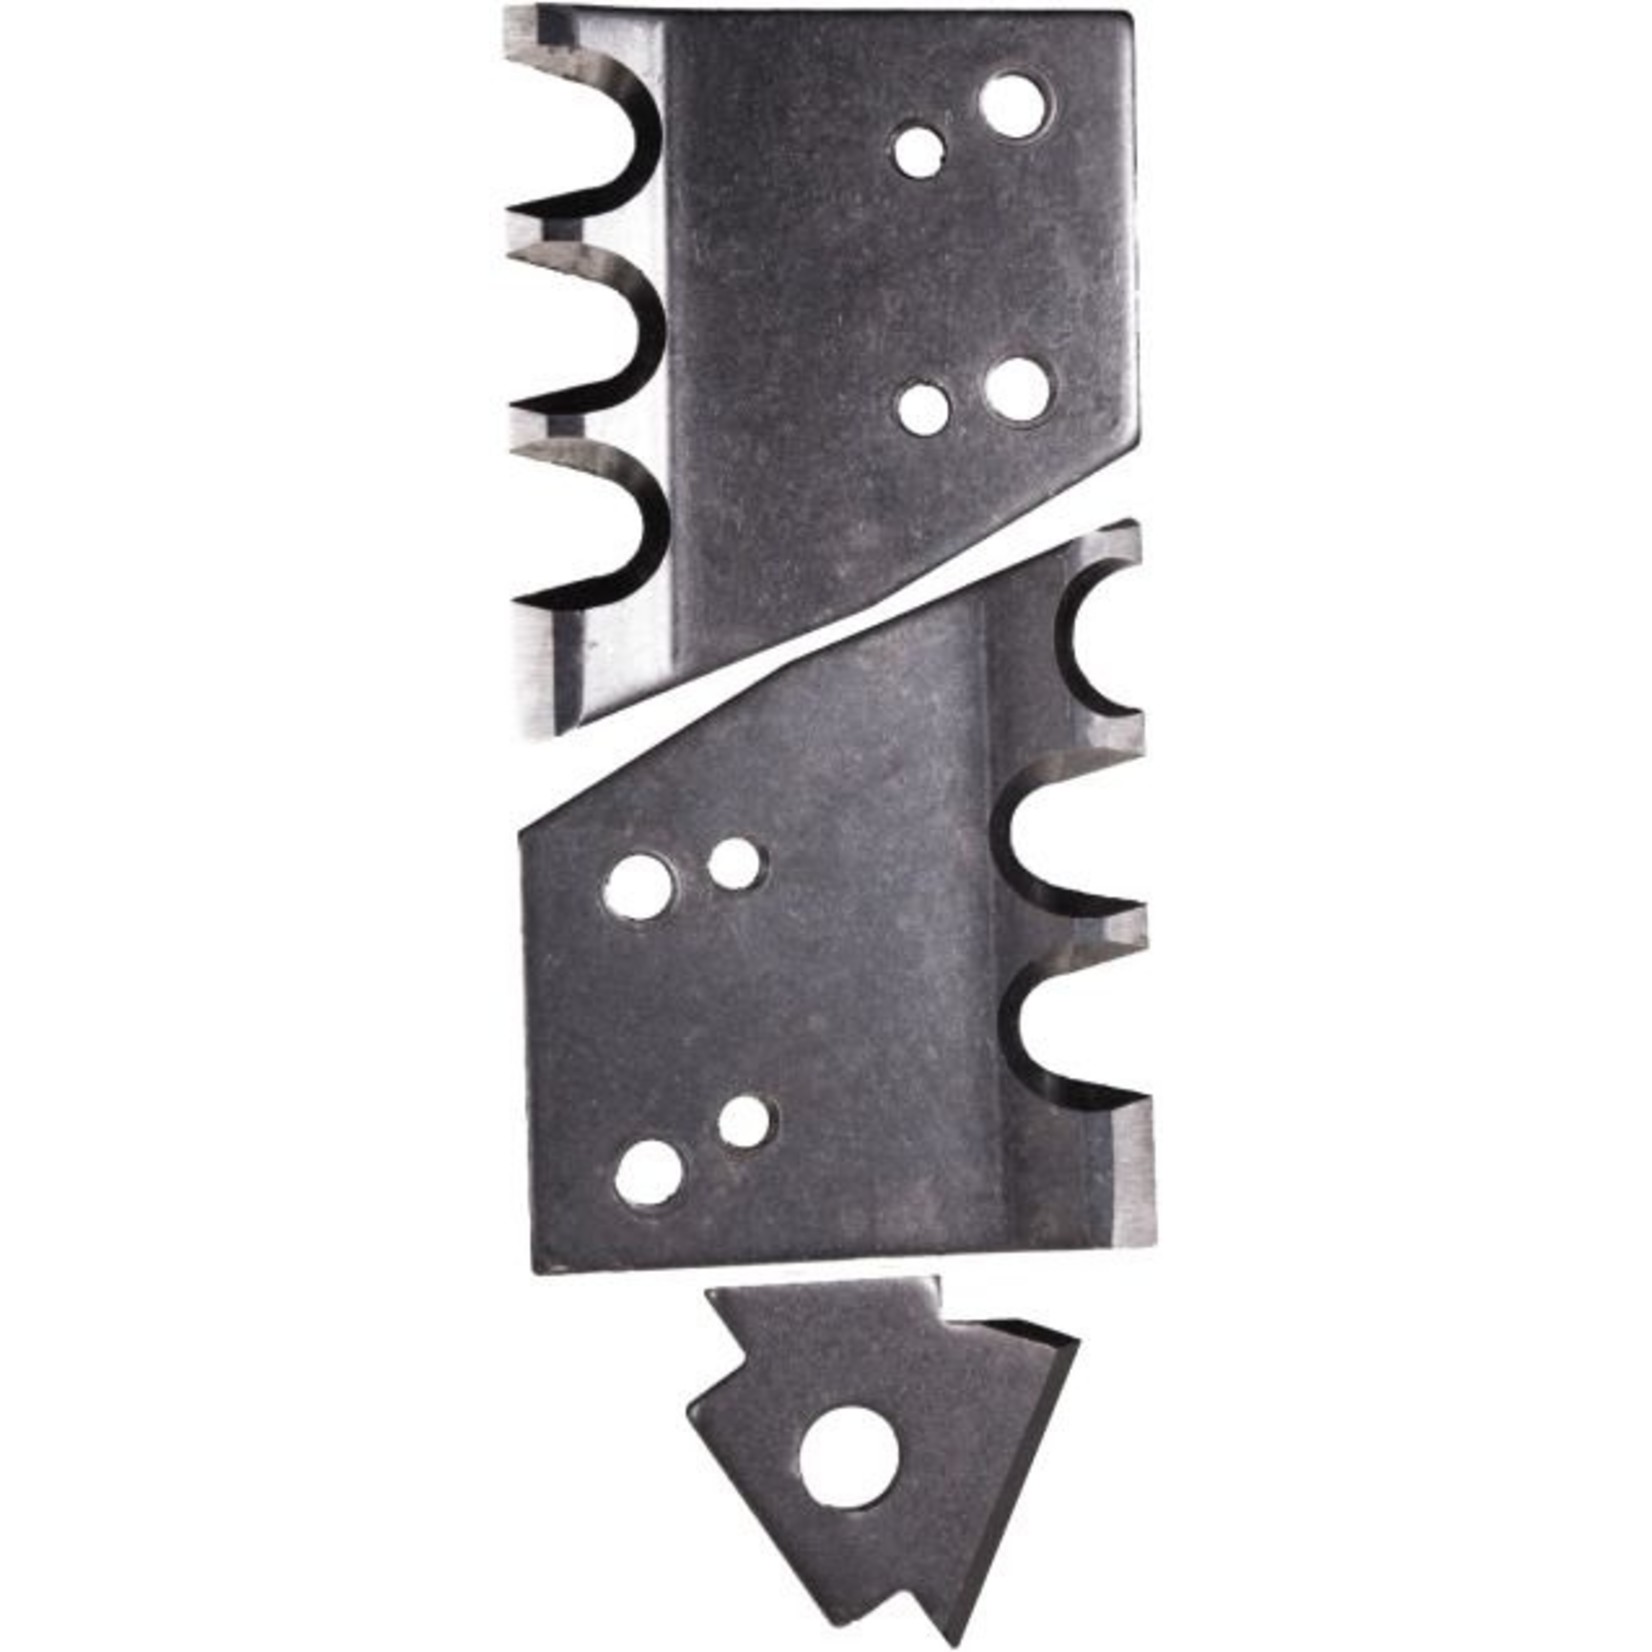 K-Drill K-Drill Ice Auger Replacement Blade Set 7.5"/8"